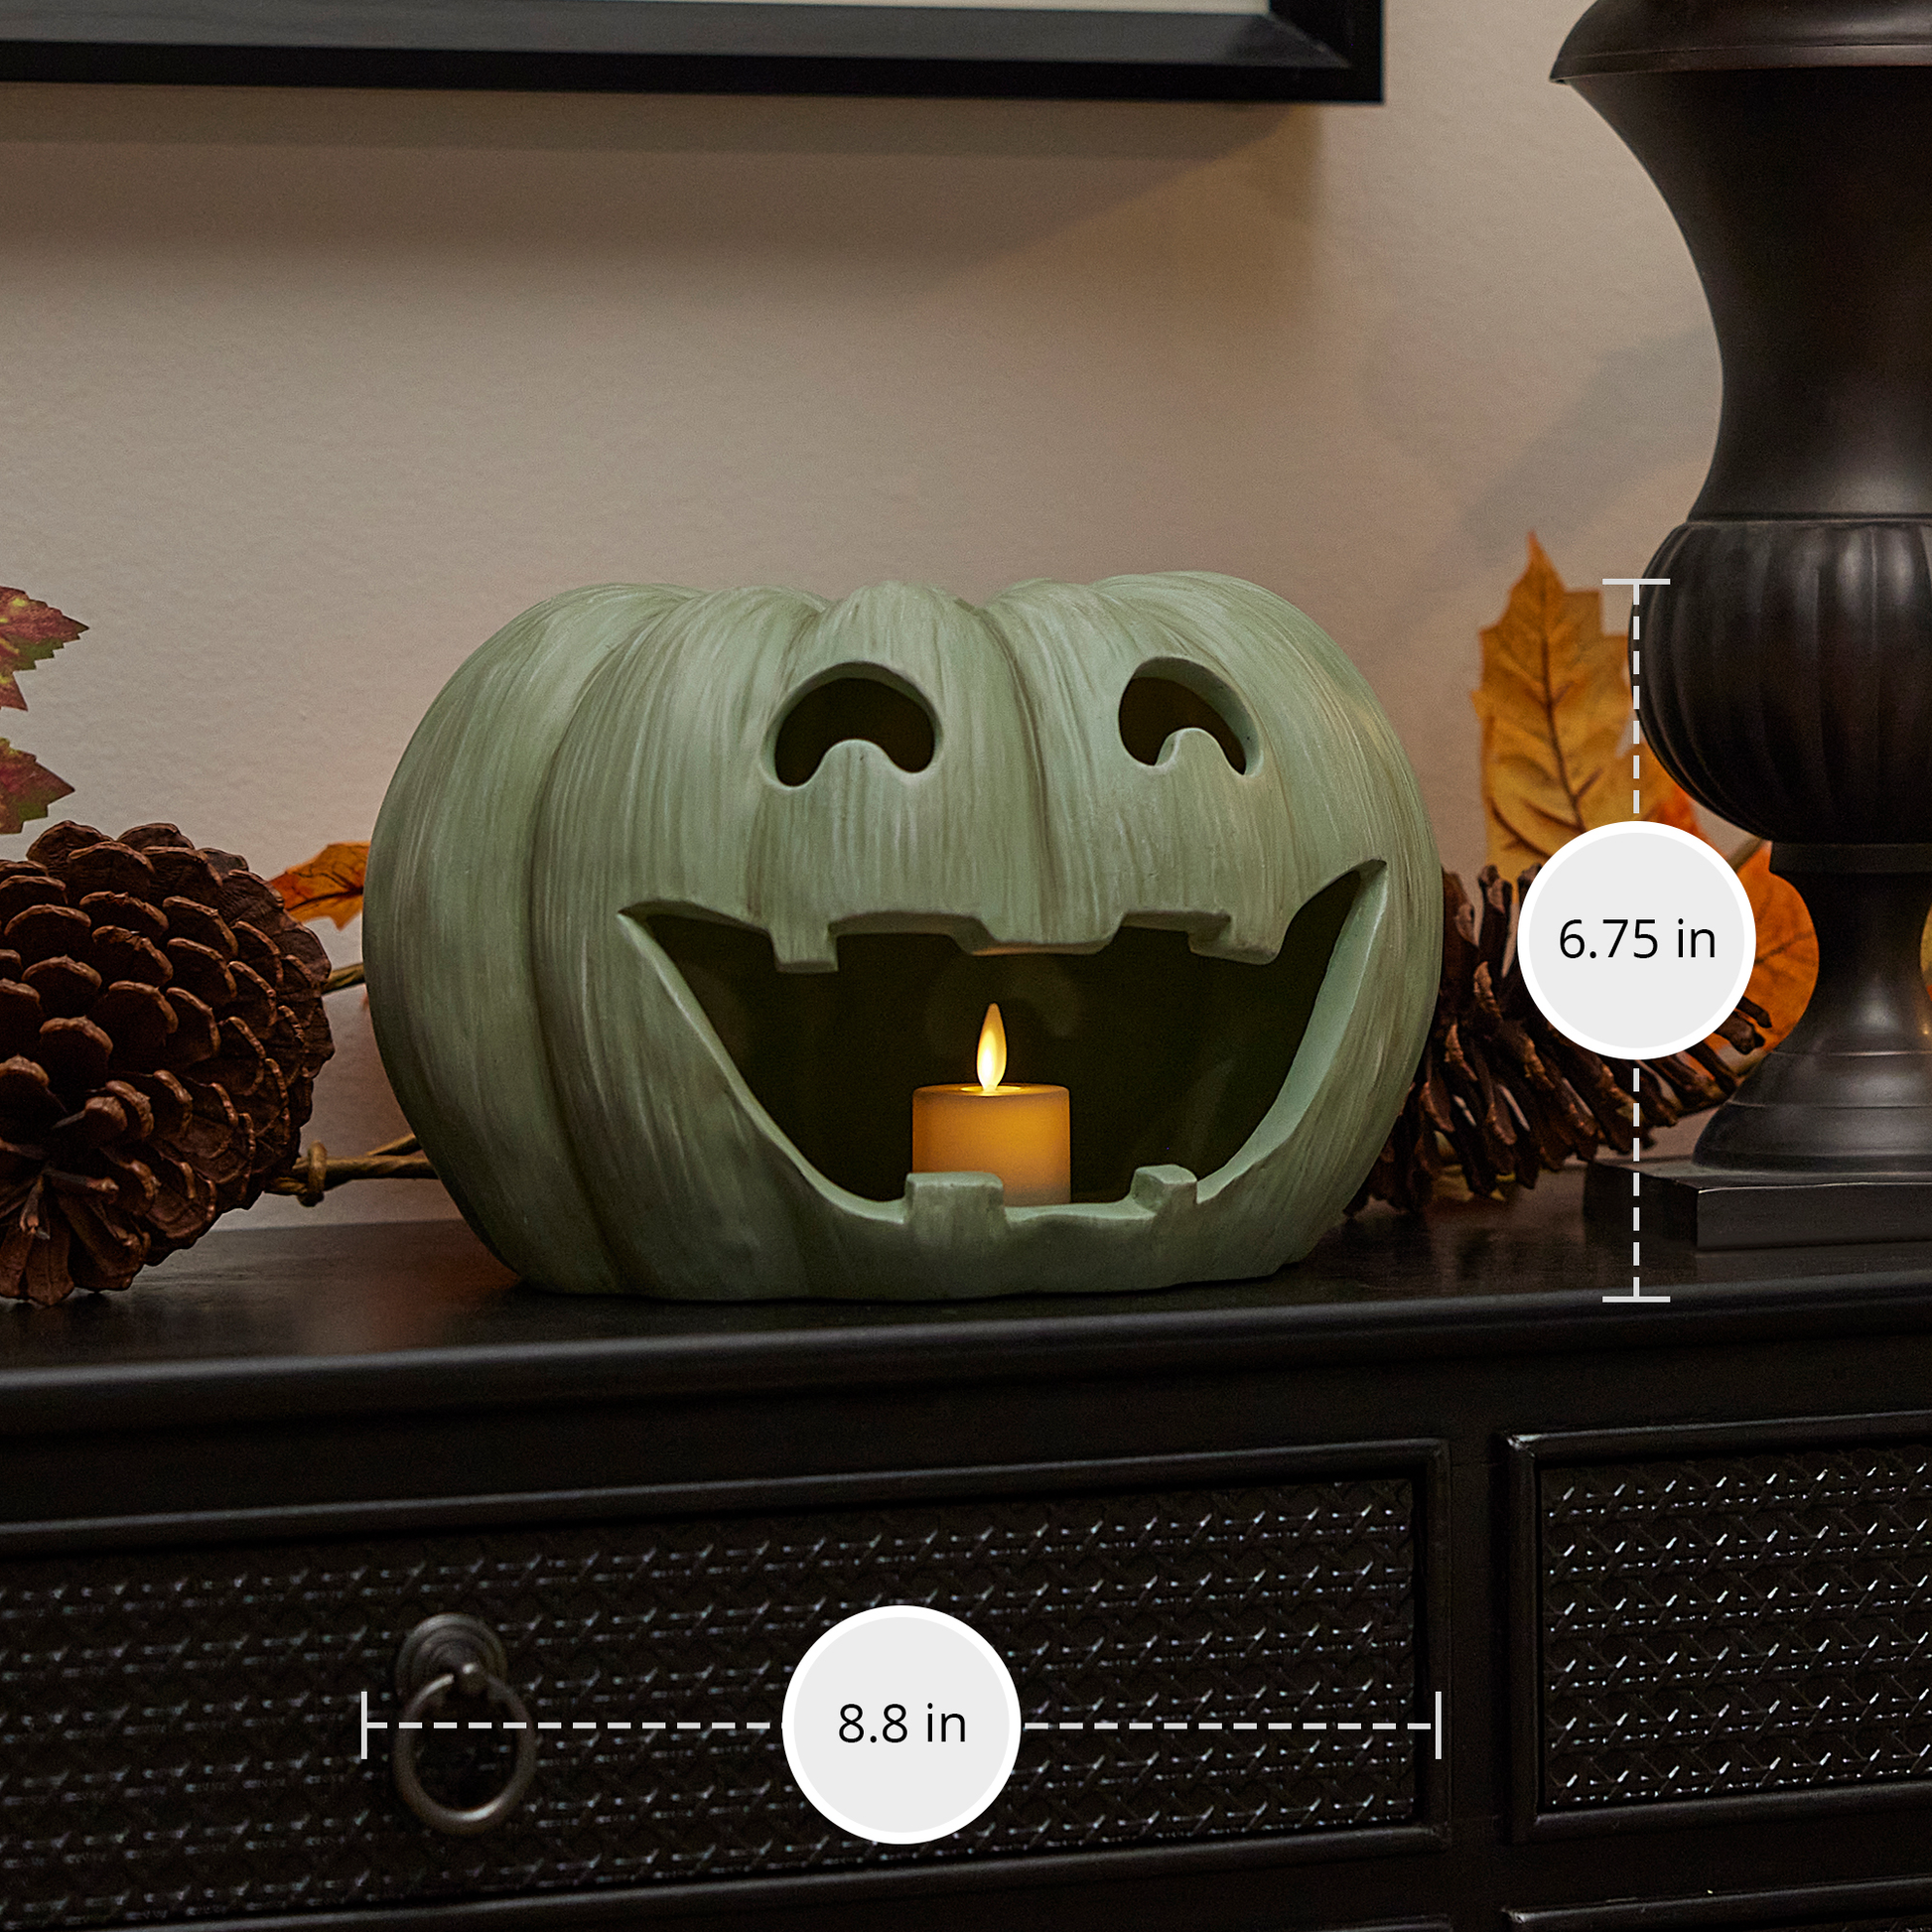 What's the trick to the Instagram-friendly jack-o'-lanterns in